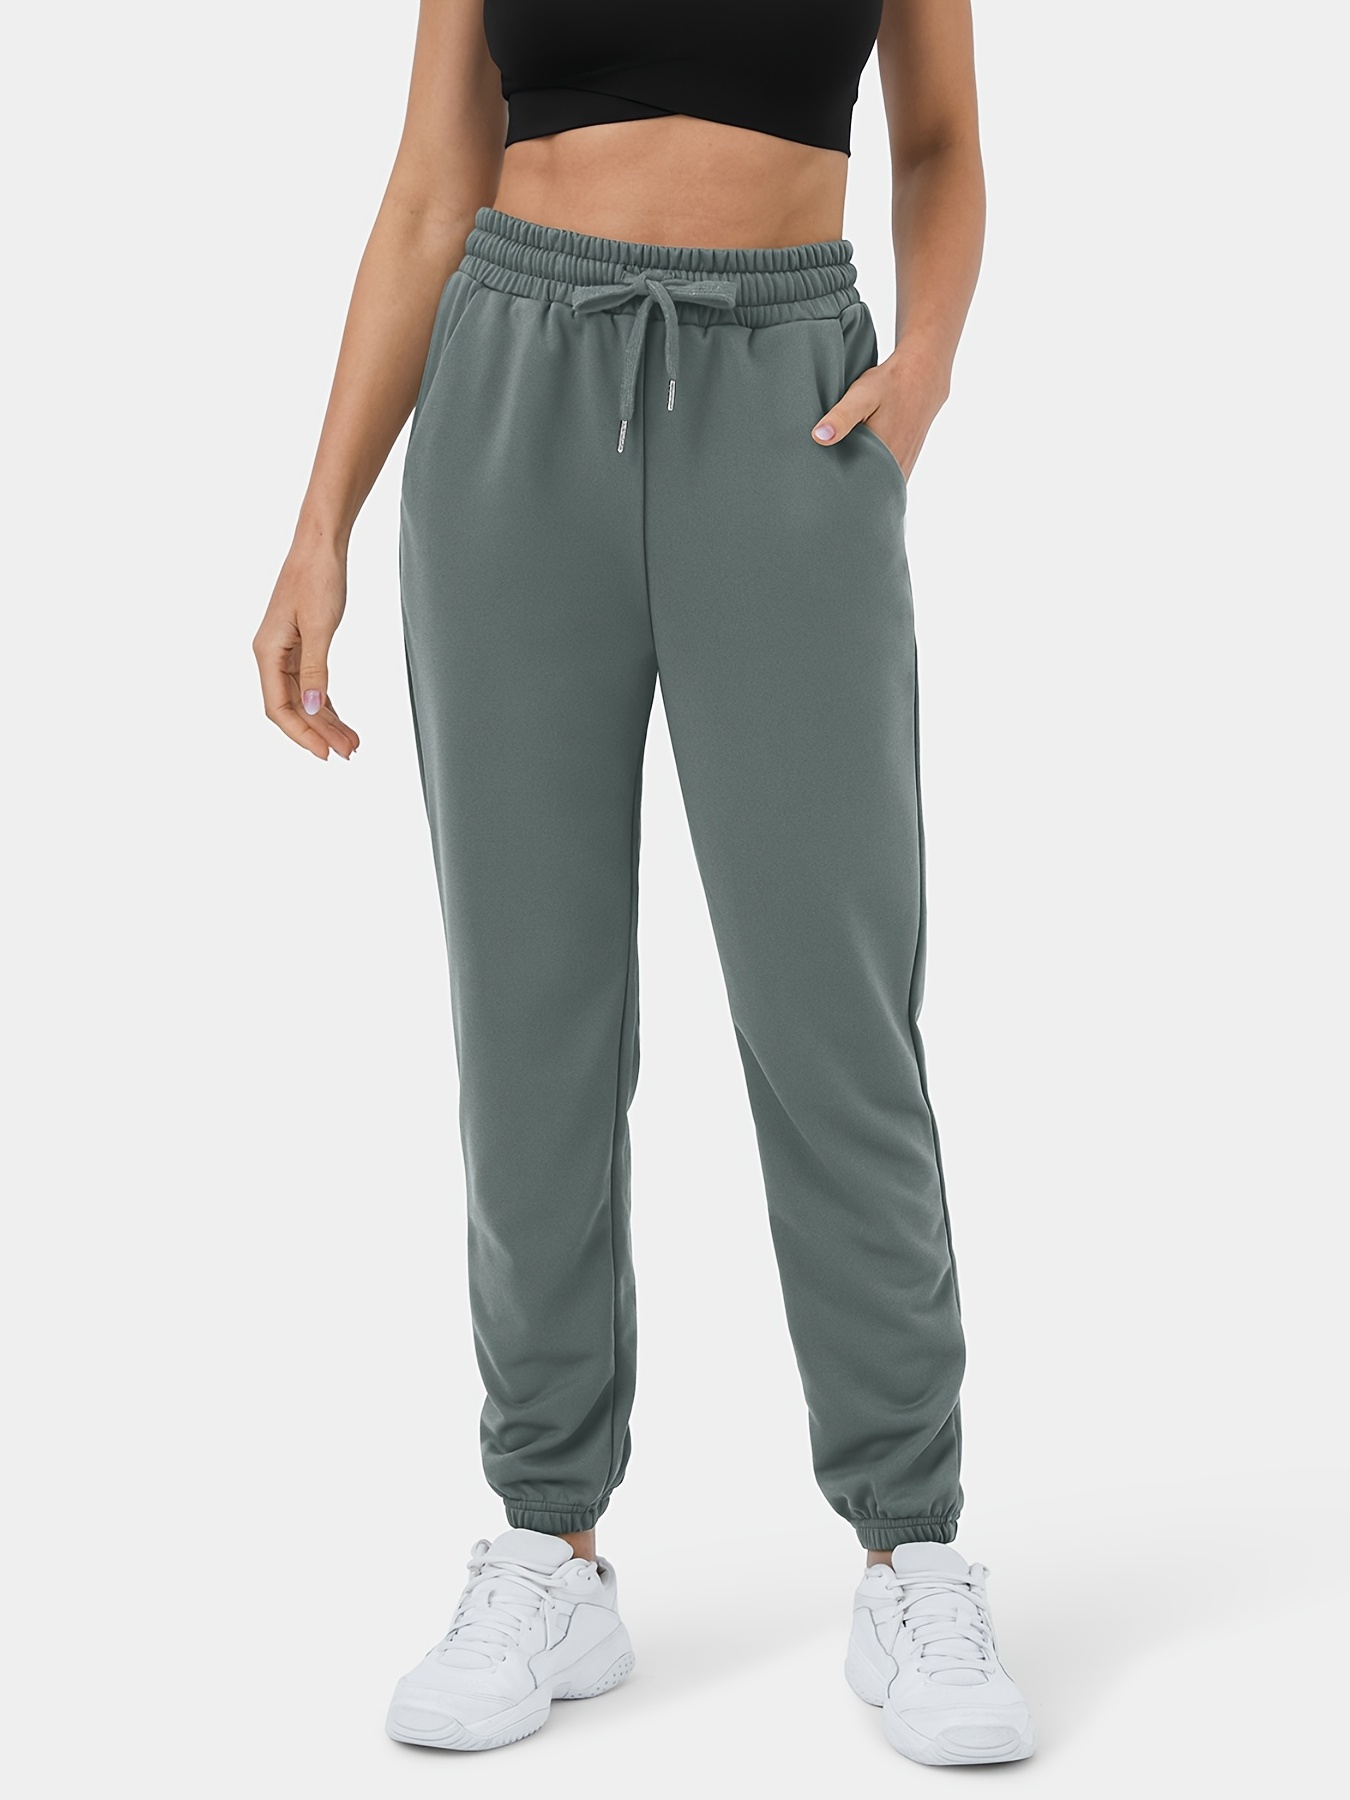 Affordable Wholesale Drawstring Sweatpants For Trendsetting Looks 